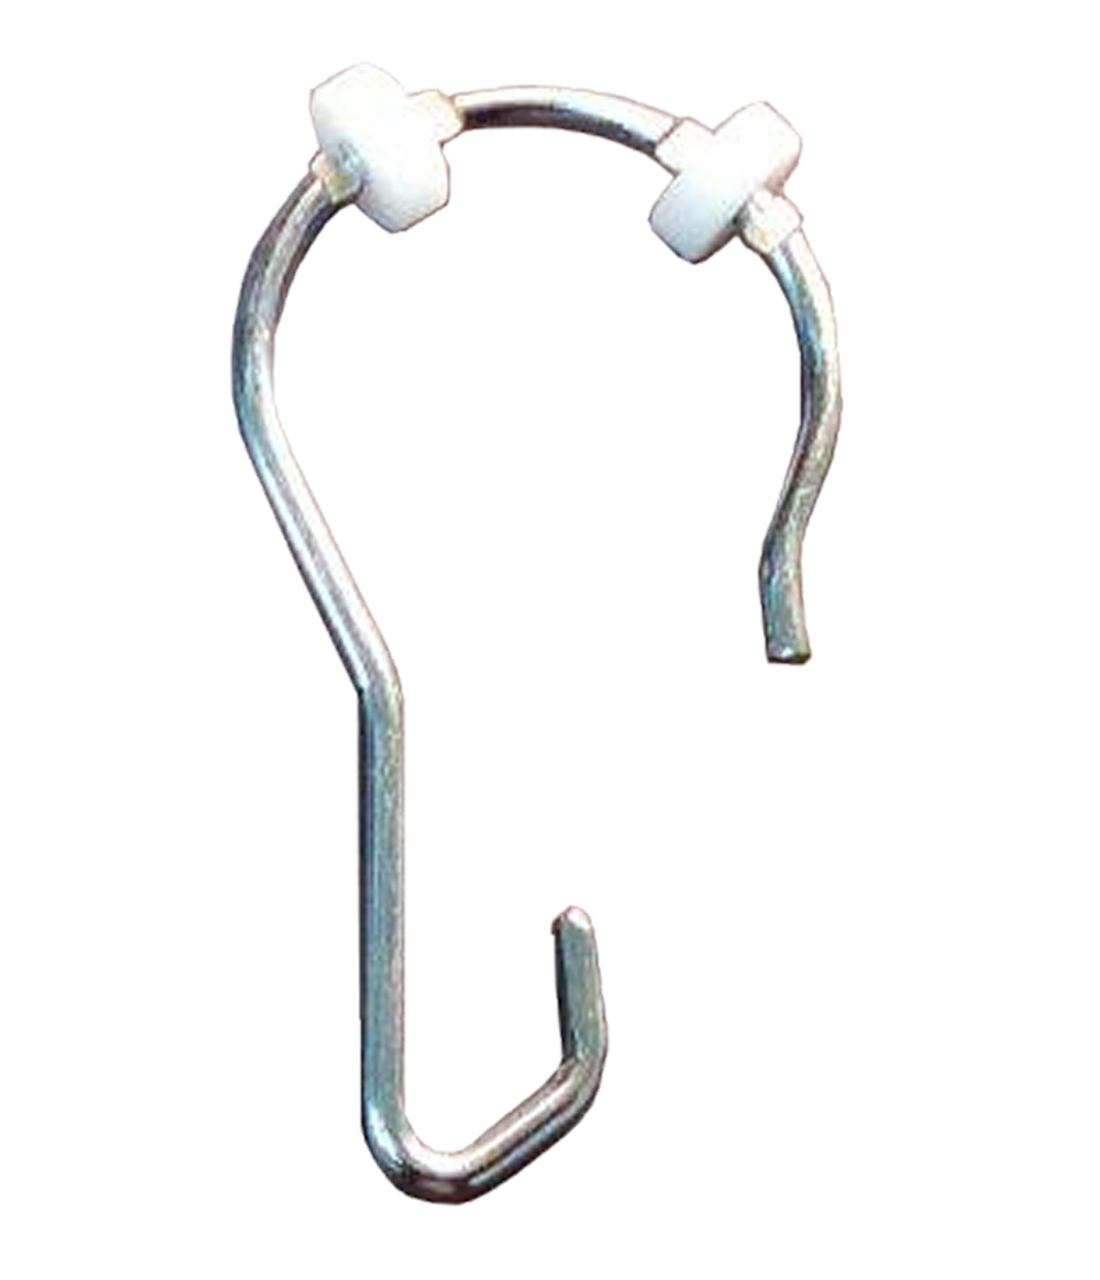 Chrome Plated Curtain Hook with Nylon Rollers - (Model #: 100chnr) Image